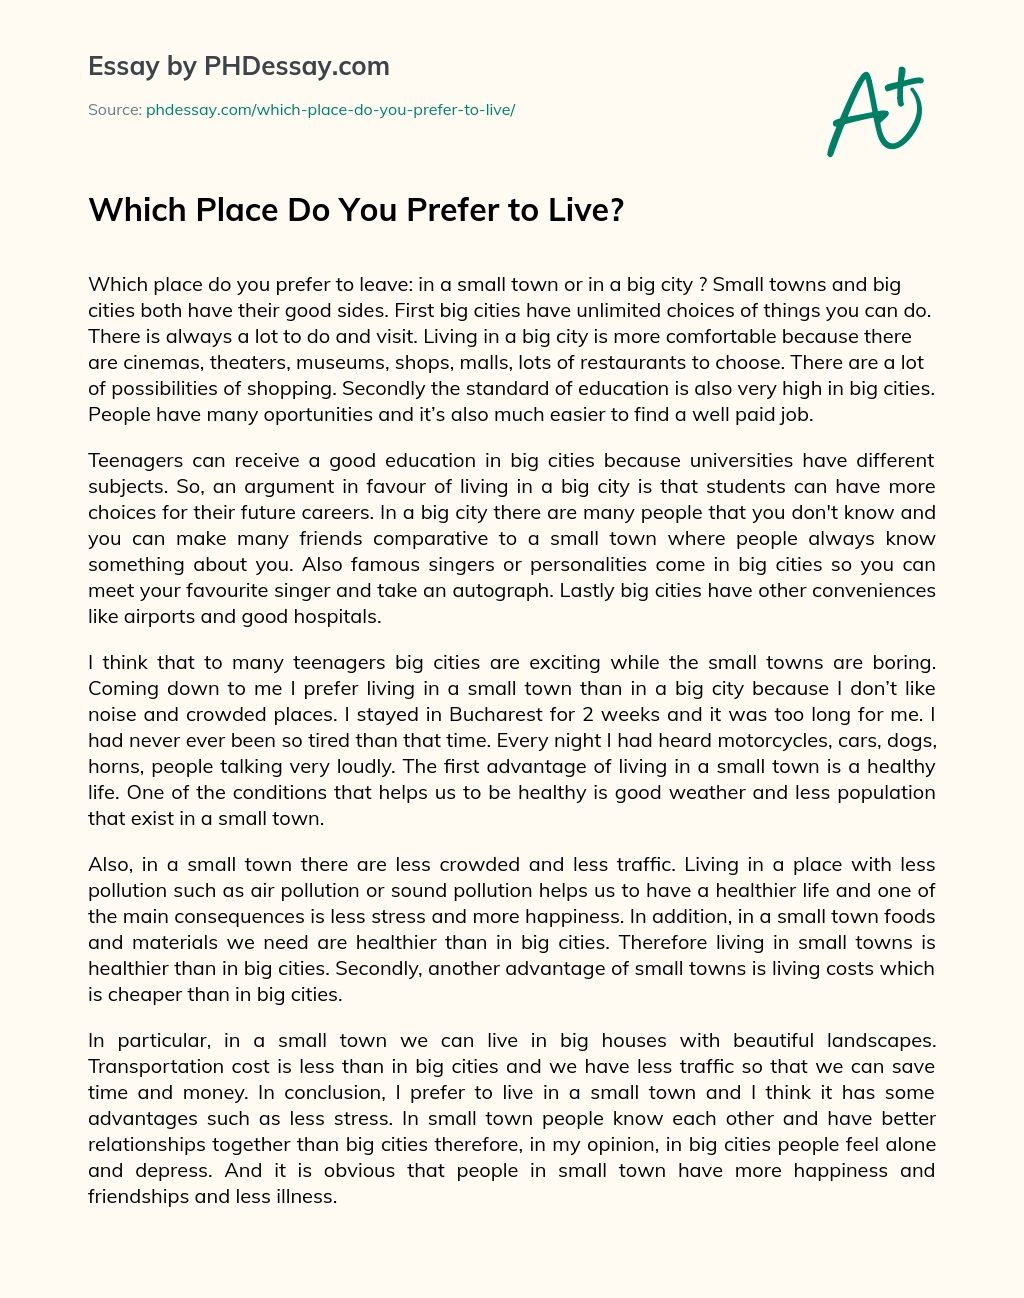 Which Place Do You Prefer to Live? essay